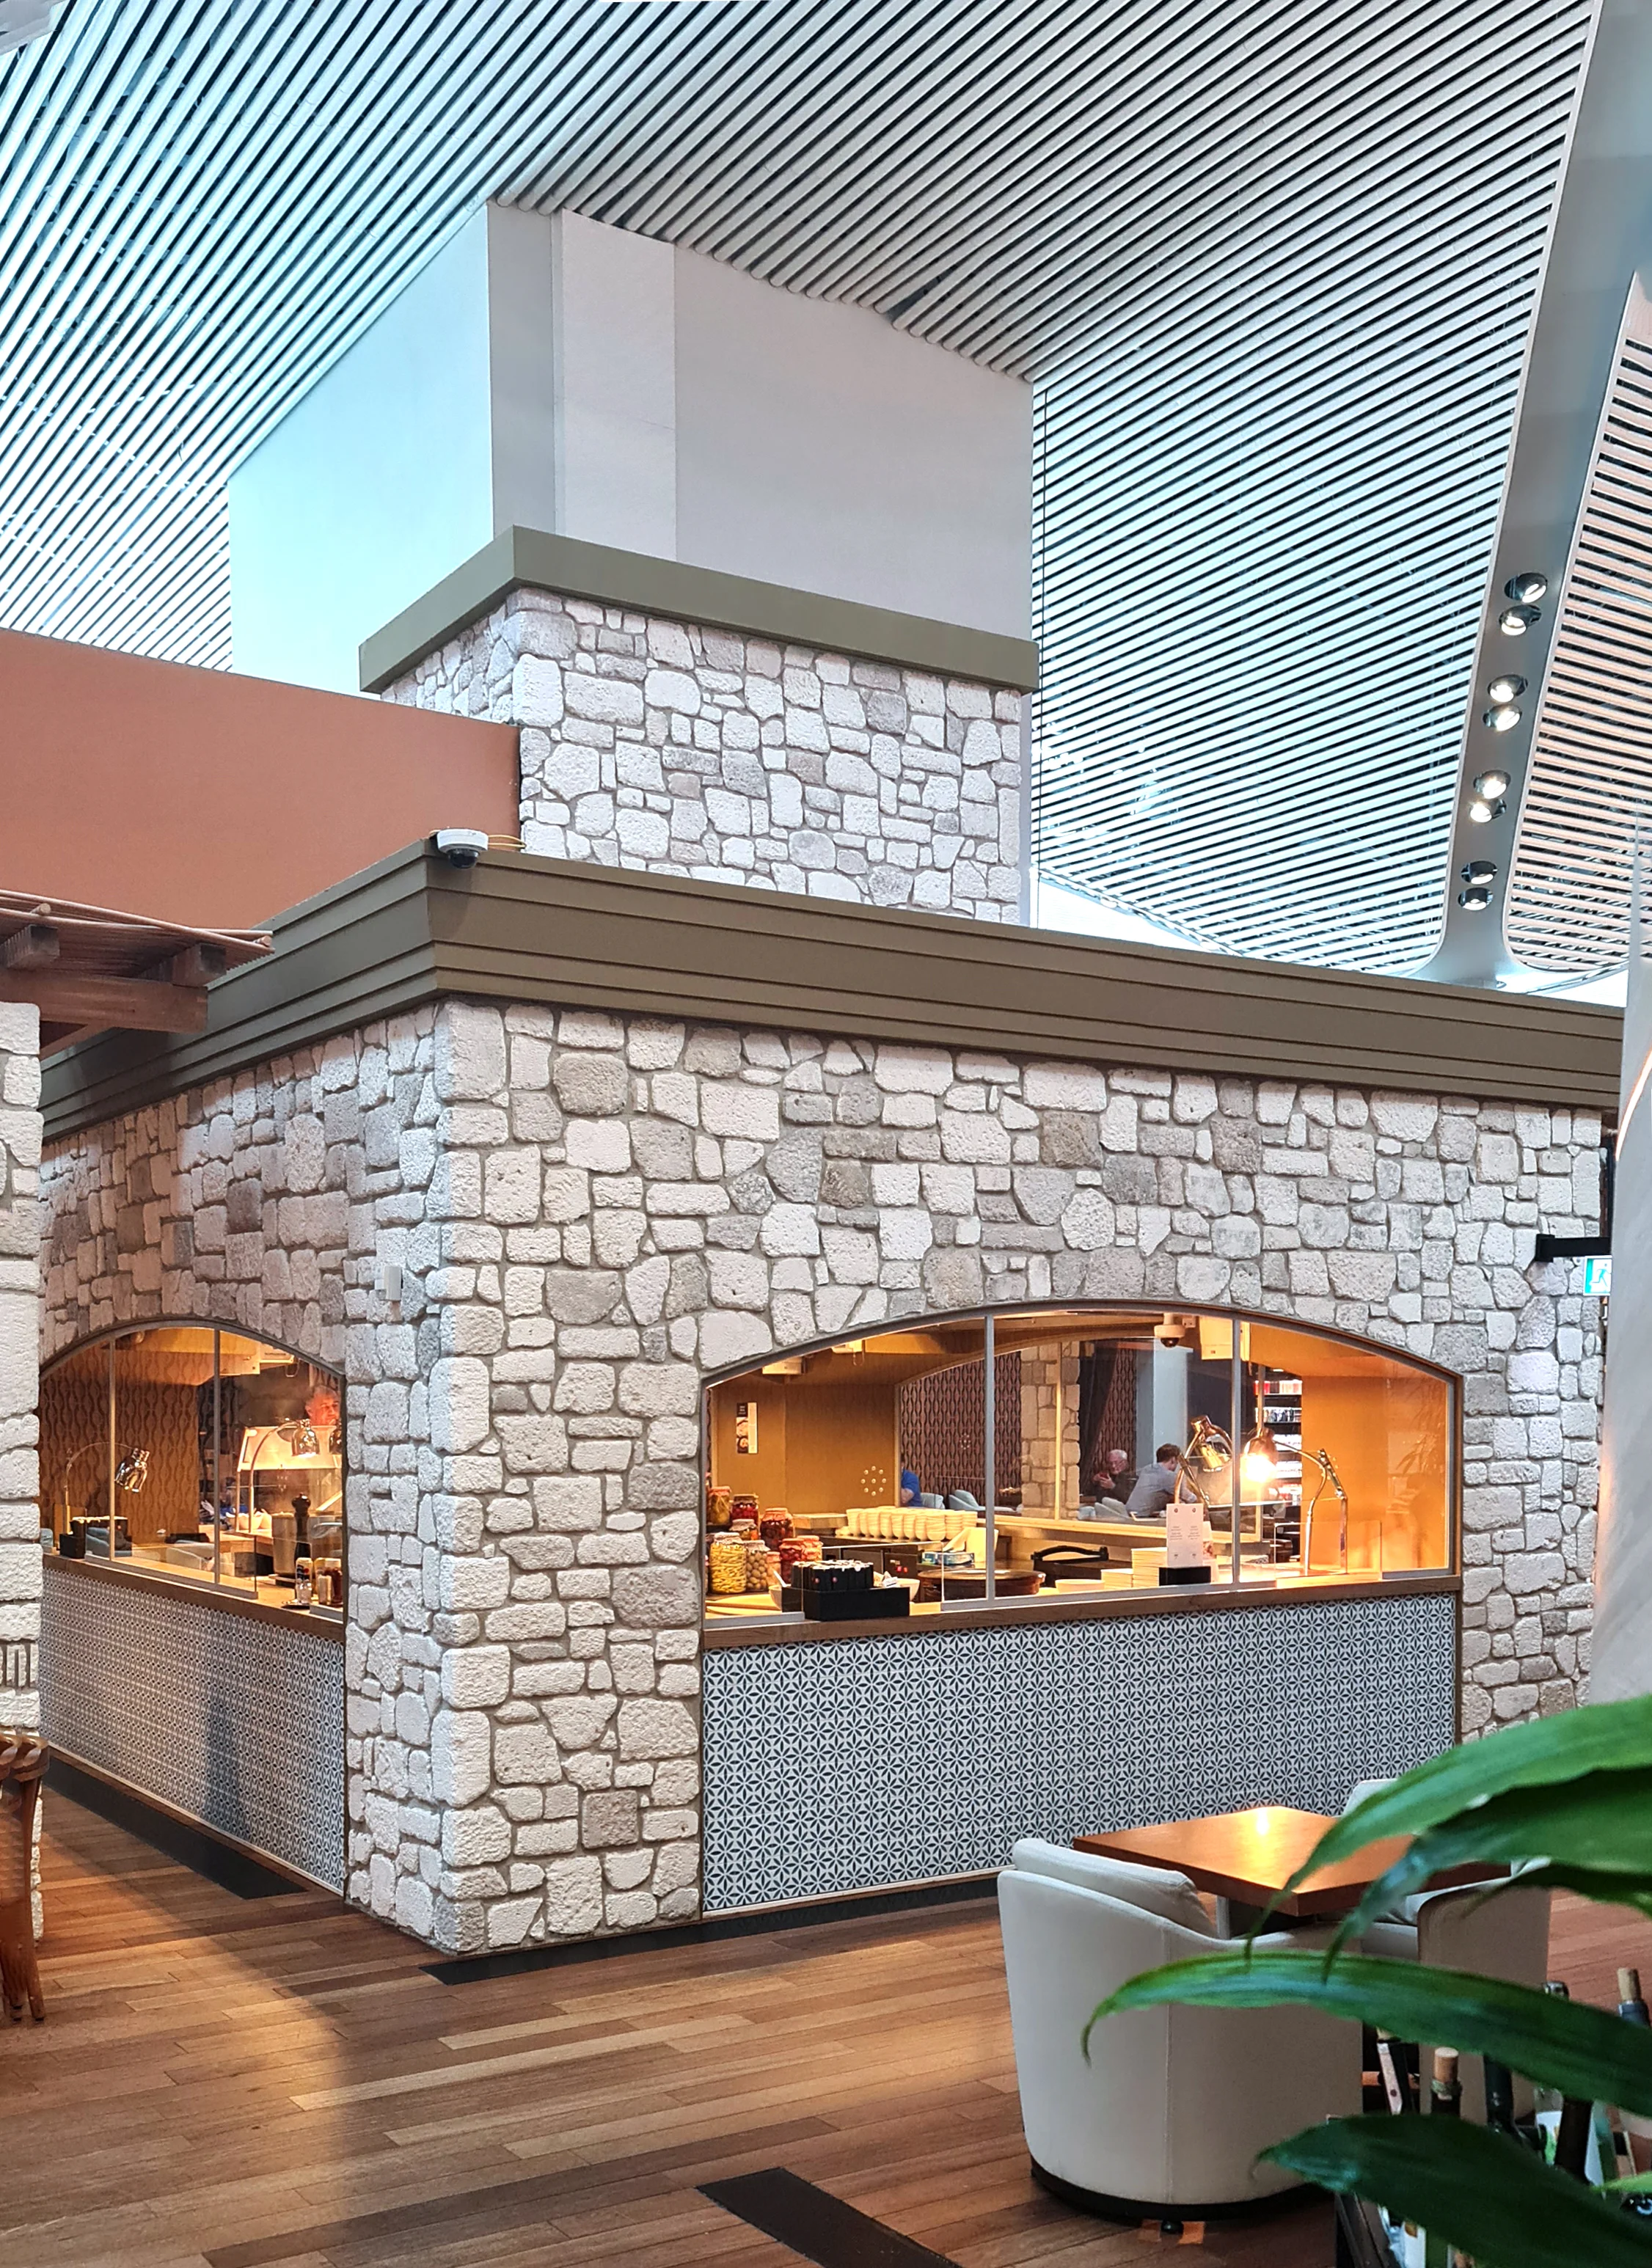 Istanbul Airport business lounge stone kiosk